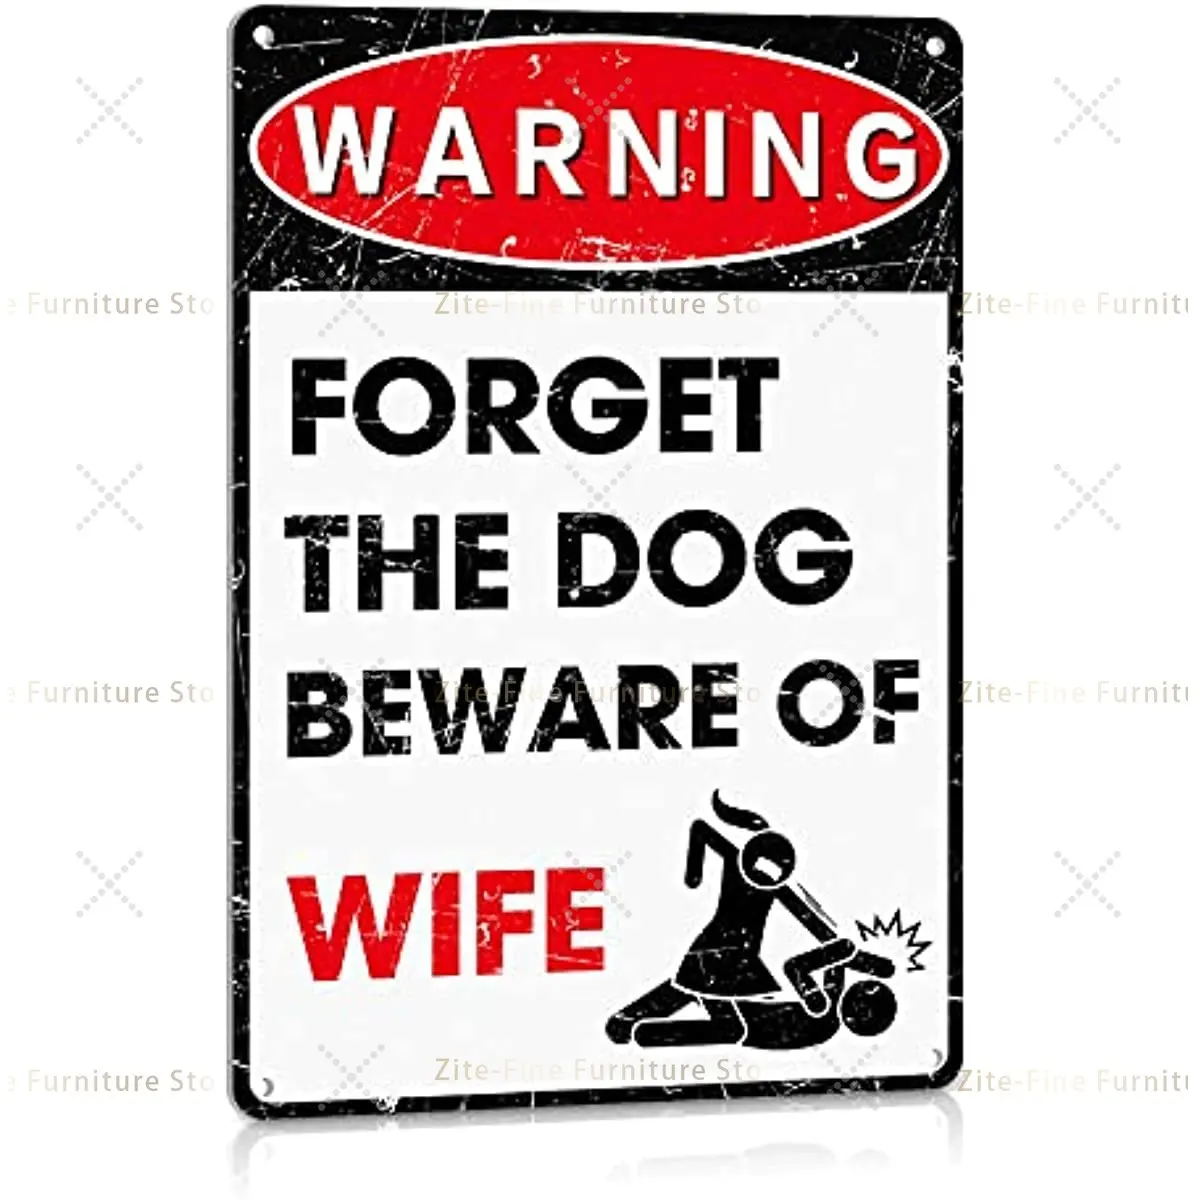 

Man Cave Decor Funny Metal Signs Bar Pub Office Garage Wall Decorations - Forget The Dog Beware of Wife Aluminum 12" x 8"